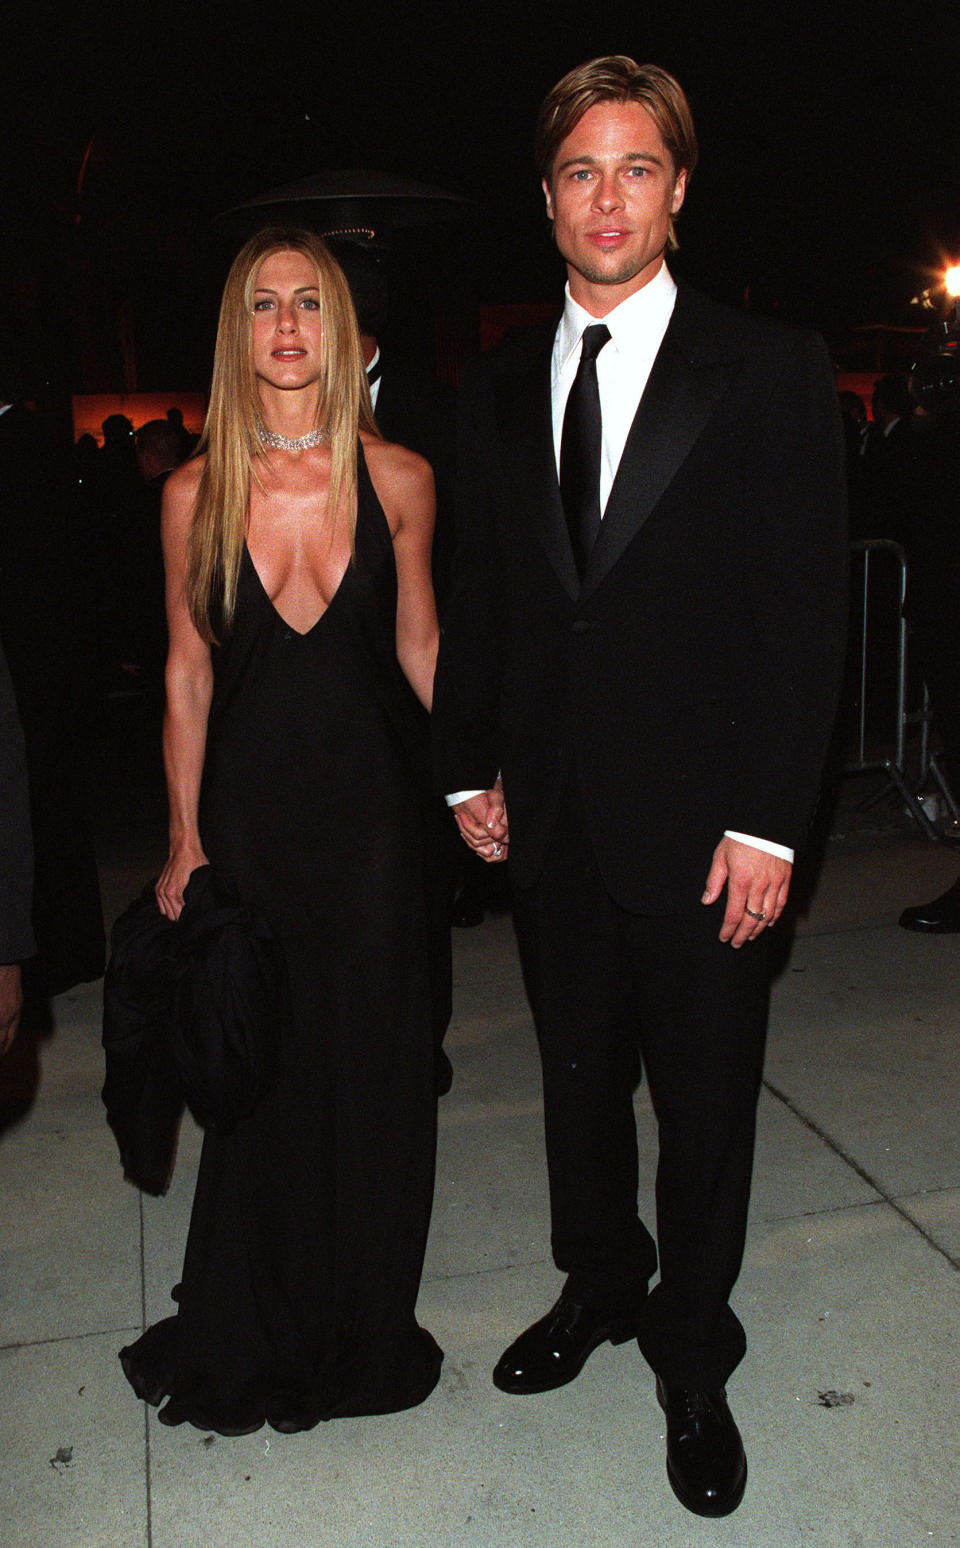 Jennifer Aniston and Brad Pitt at the Vanity Fair Party held at Morton's for the 72nd Annual Academy Awards. 3-26-00  Hollywood, CA  Photo: Evan Agostini/Getty Images